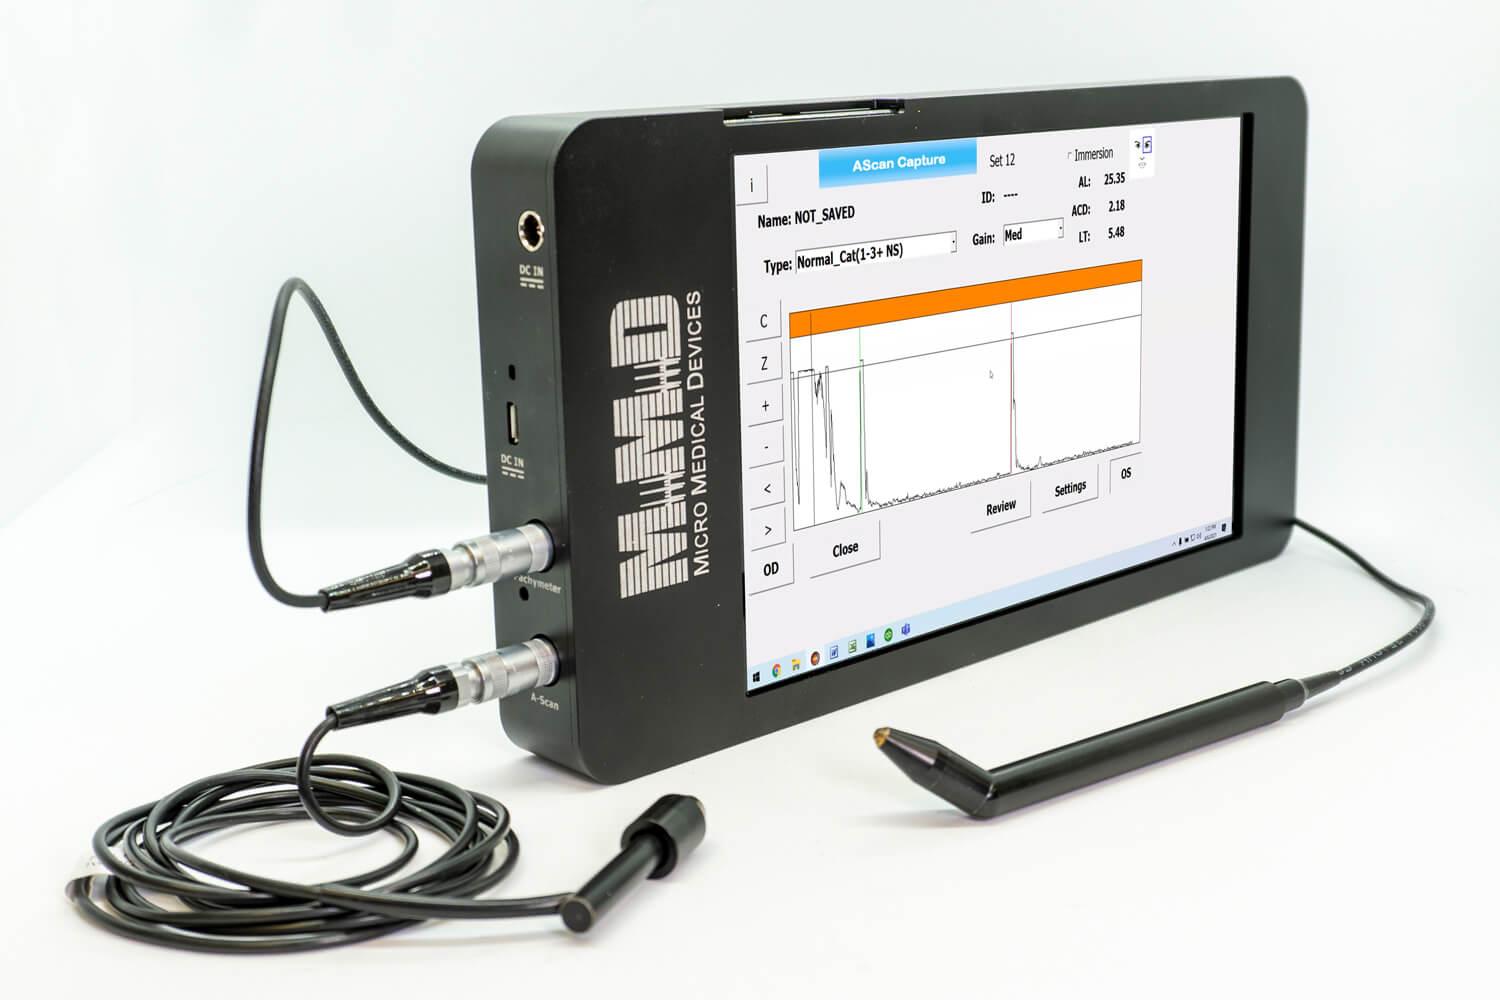 Portable A Scan probe for measuring axial eye length by Micro Medical Devices